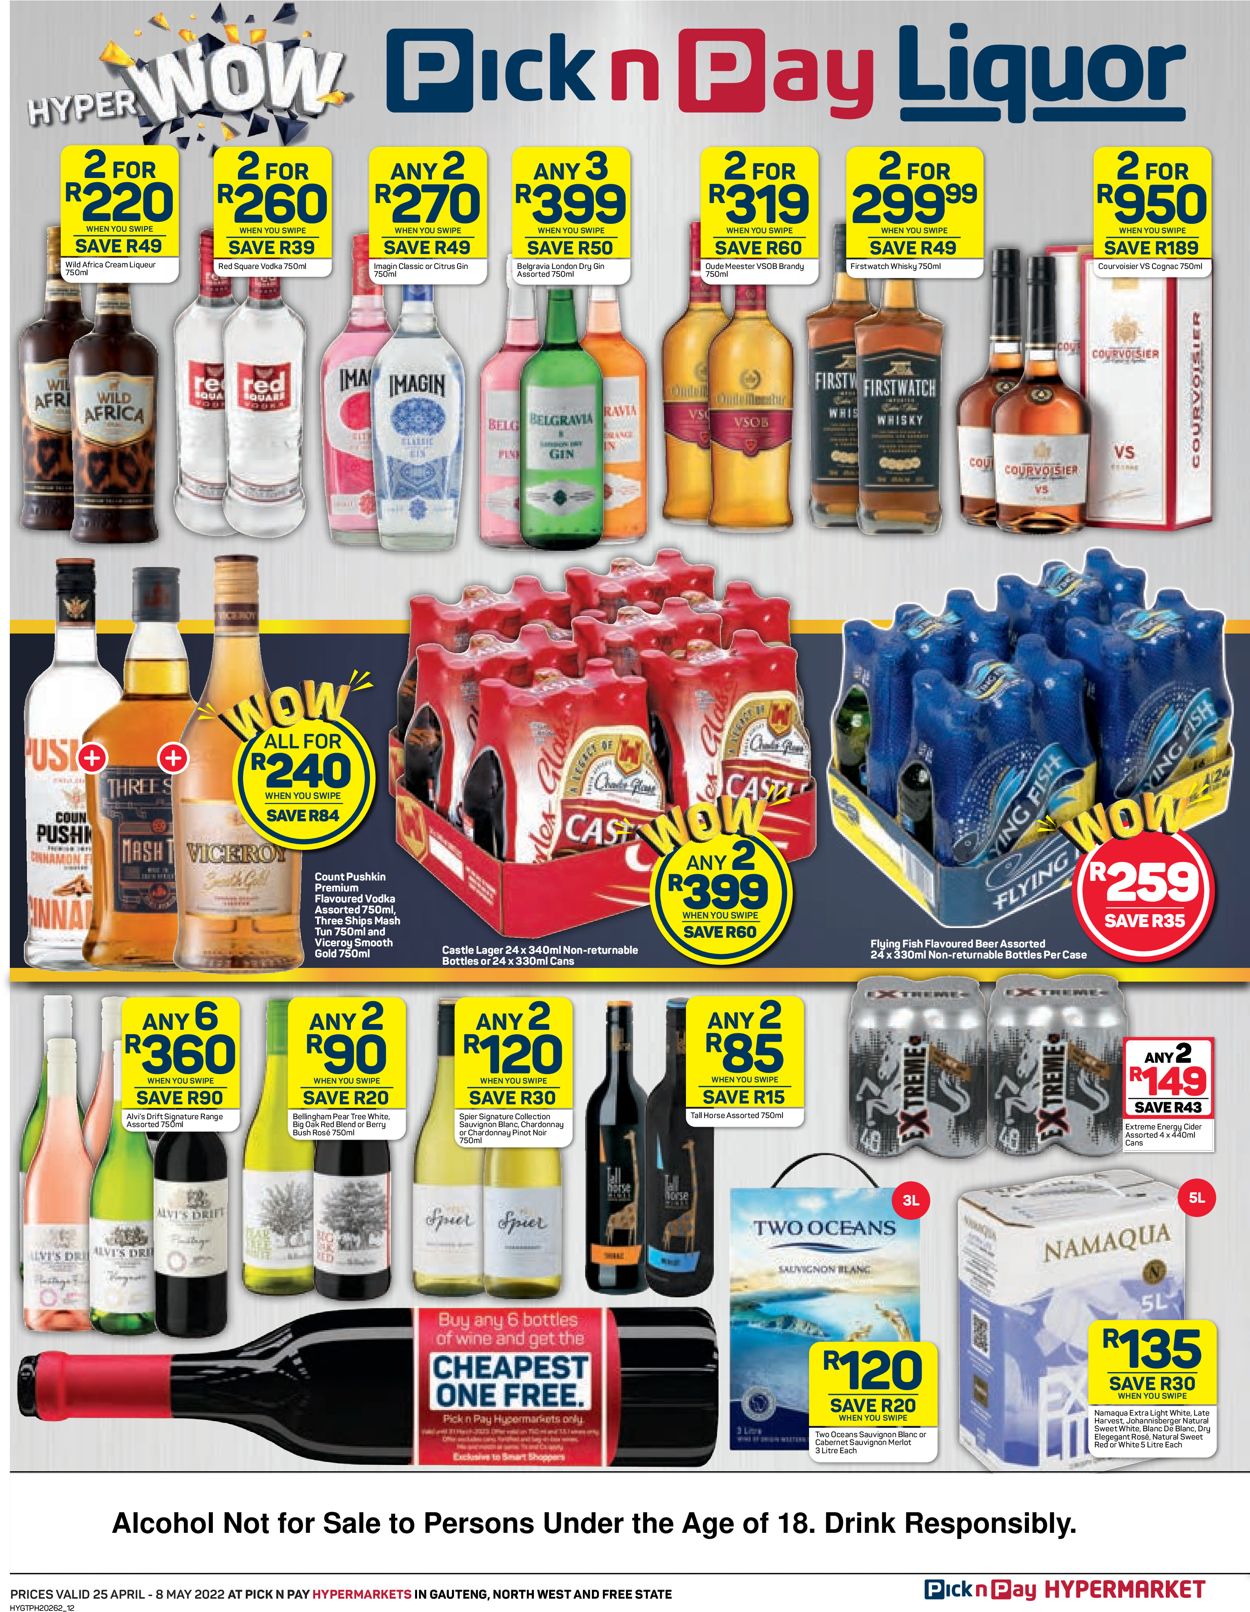 Pick n Pay Current catalogue 2022/04/25 2022/05/08 [12]